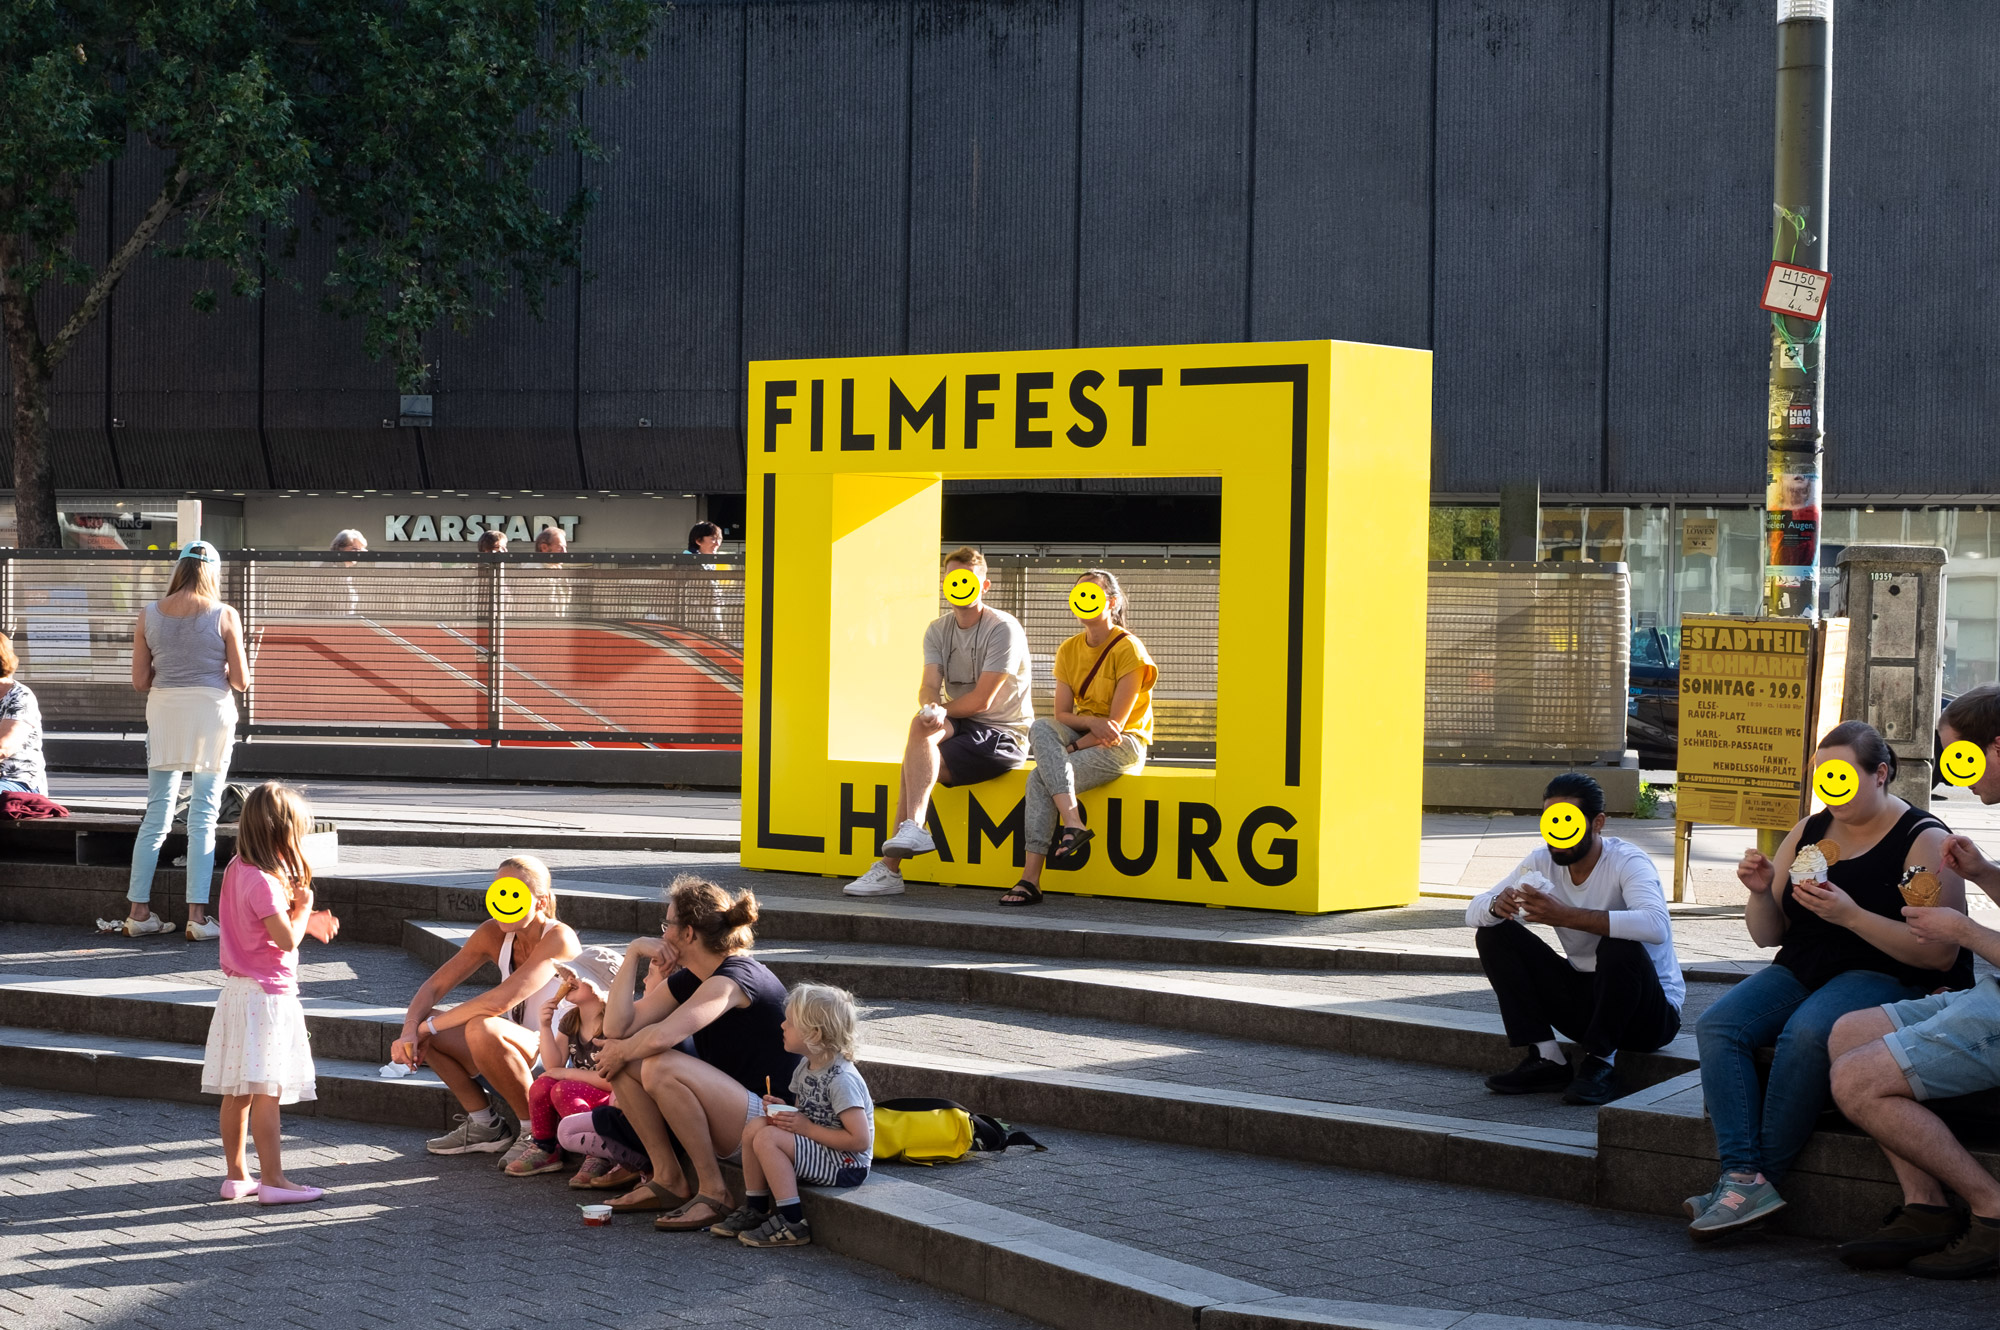 Outdoor space installations throughout the city Filmfest Hamburg